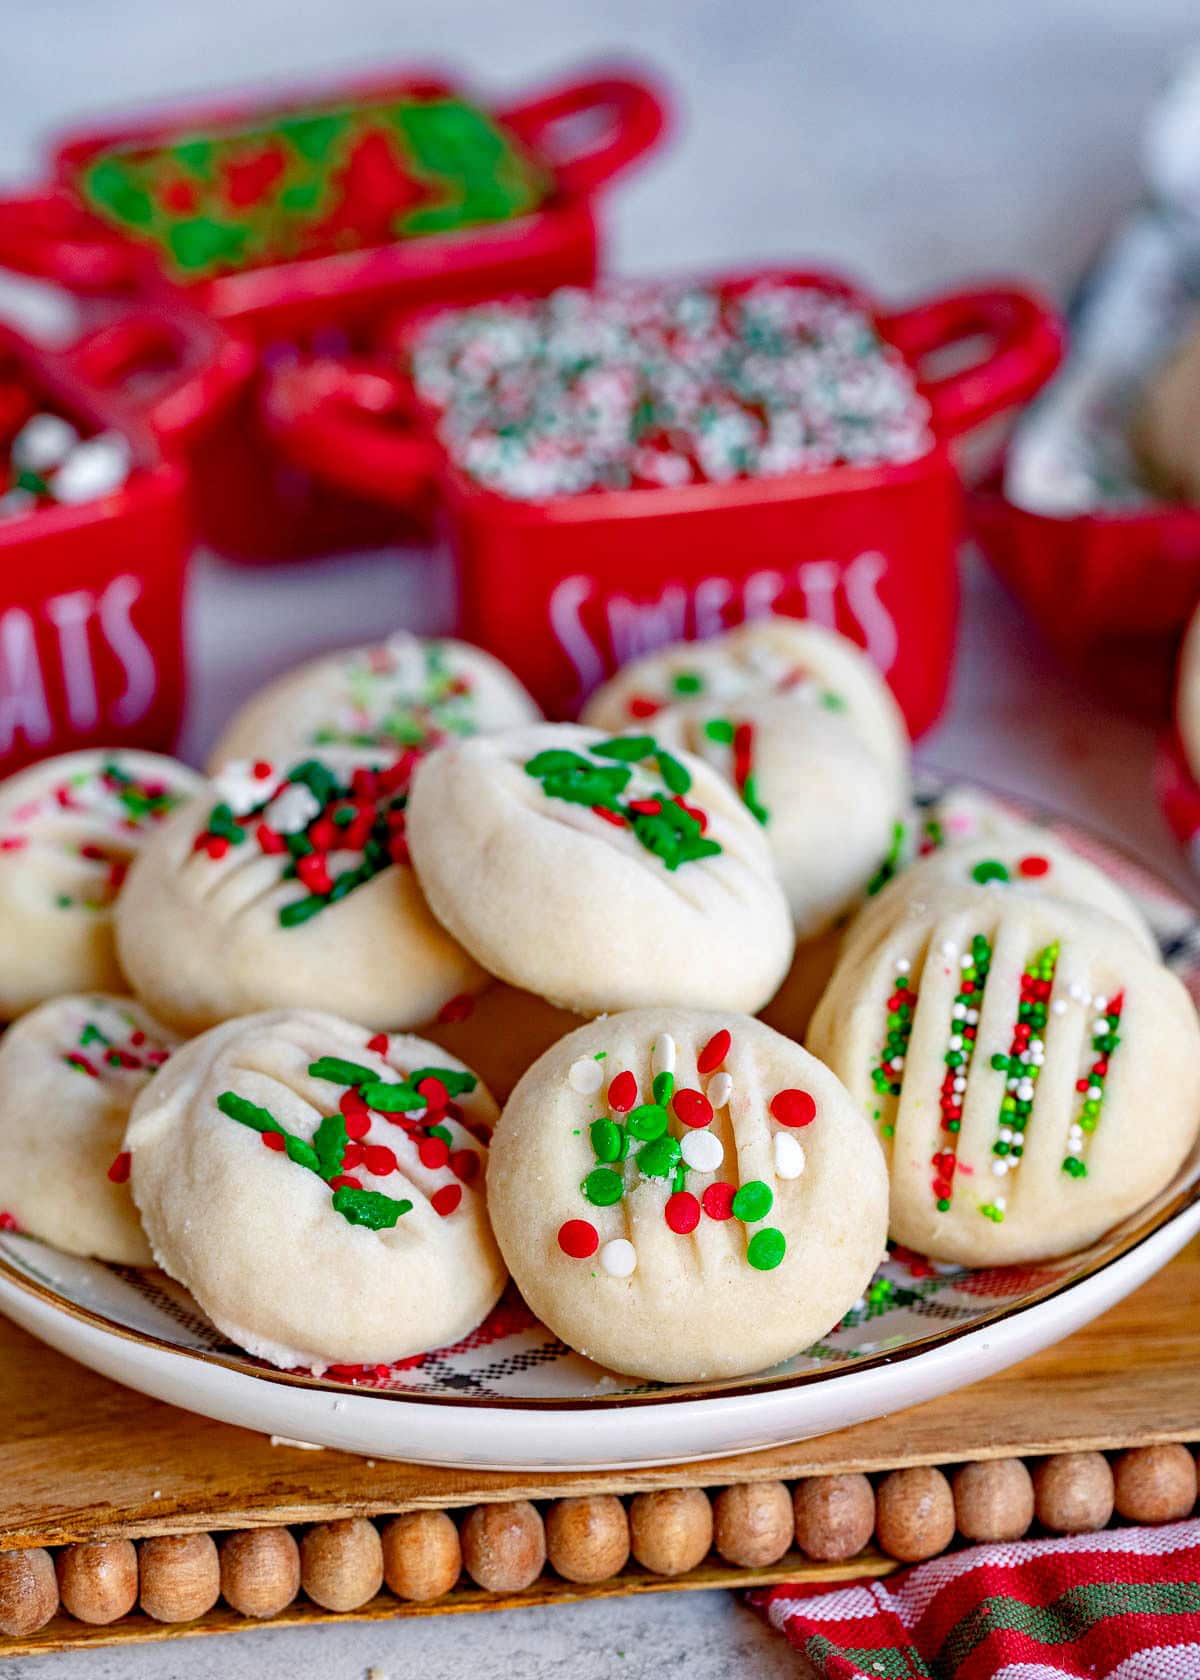 whipped shortbread cookies on a Christmas plate with red, green and white sprinkles. Plate is on cutting board sitting next to a Christmas towel.